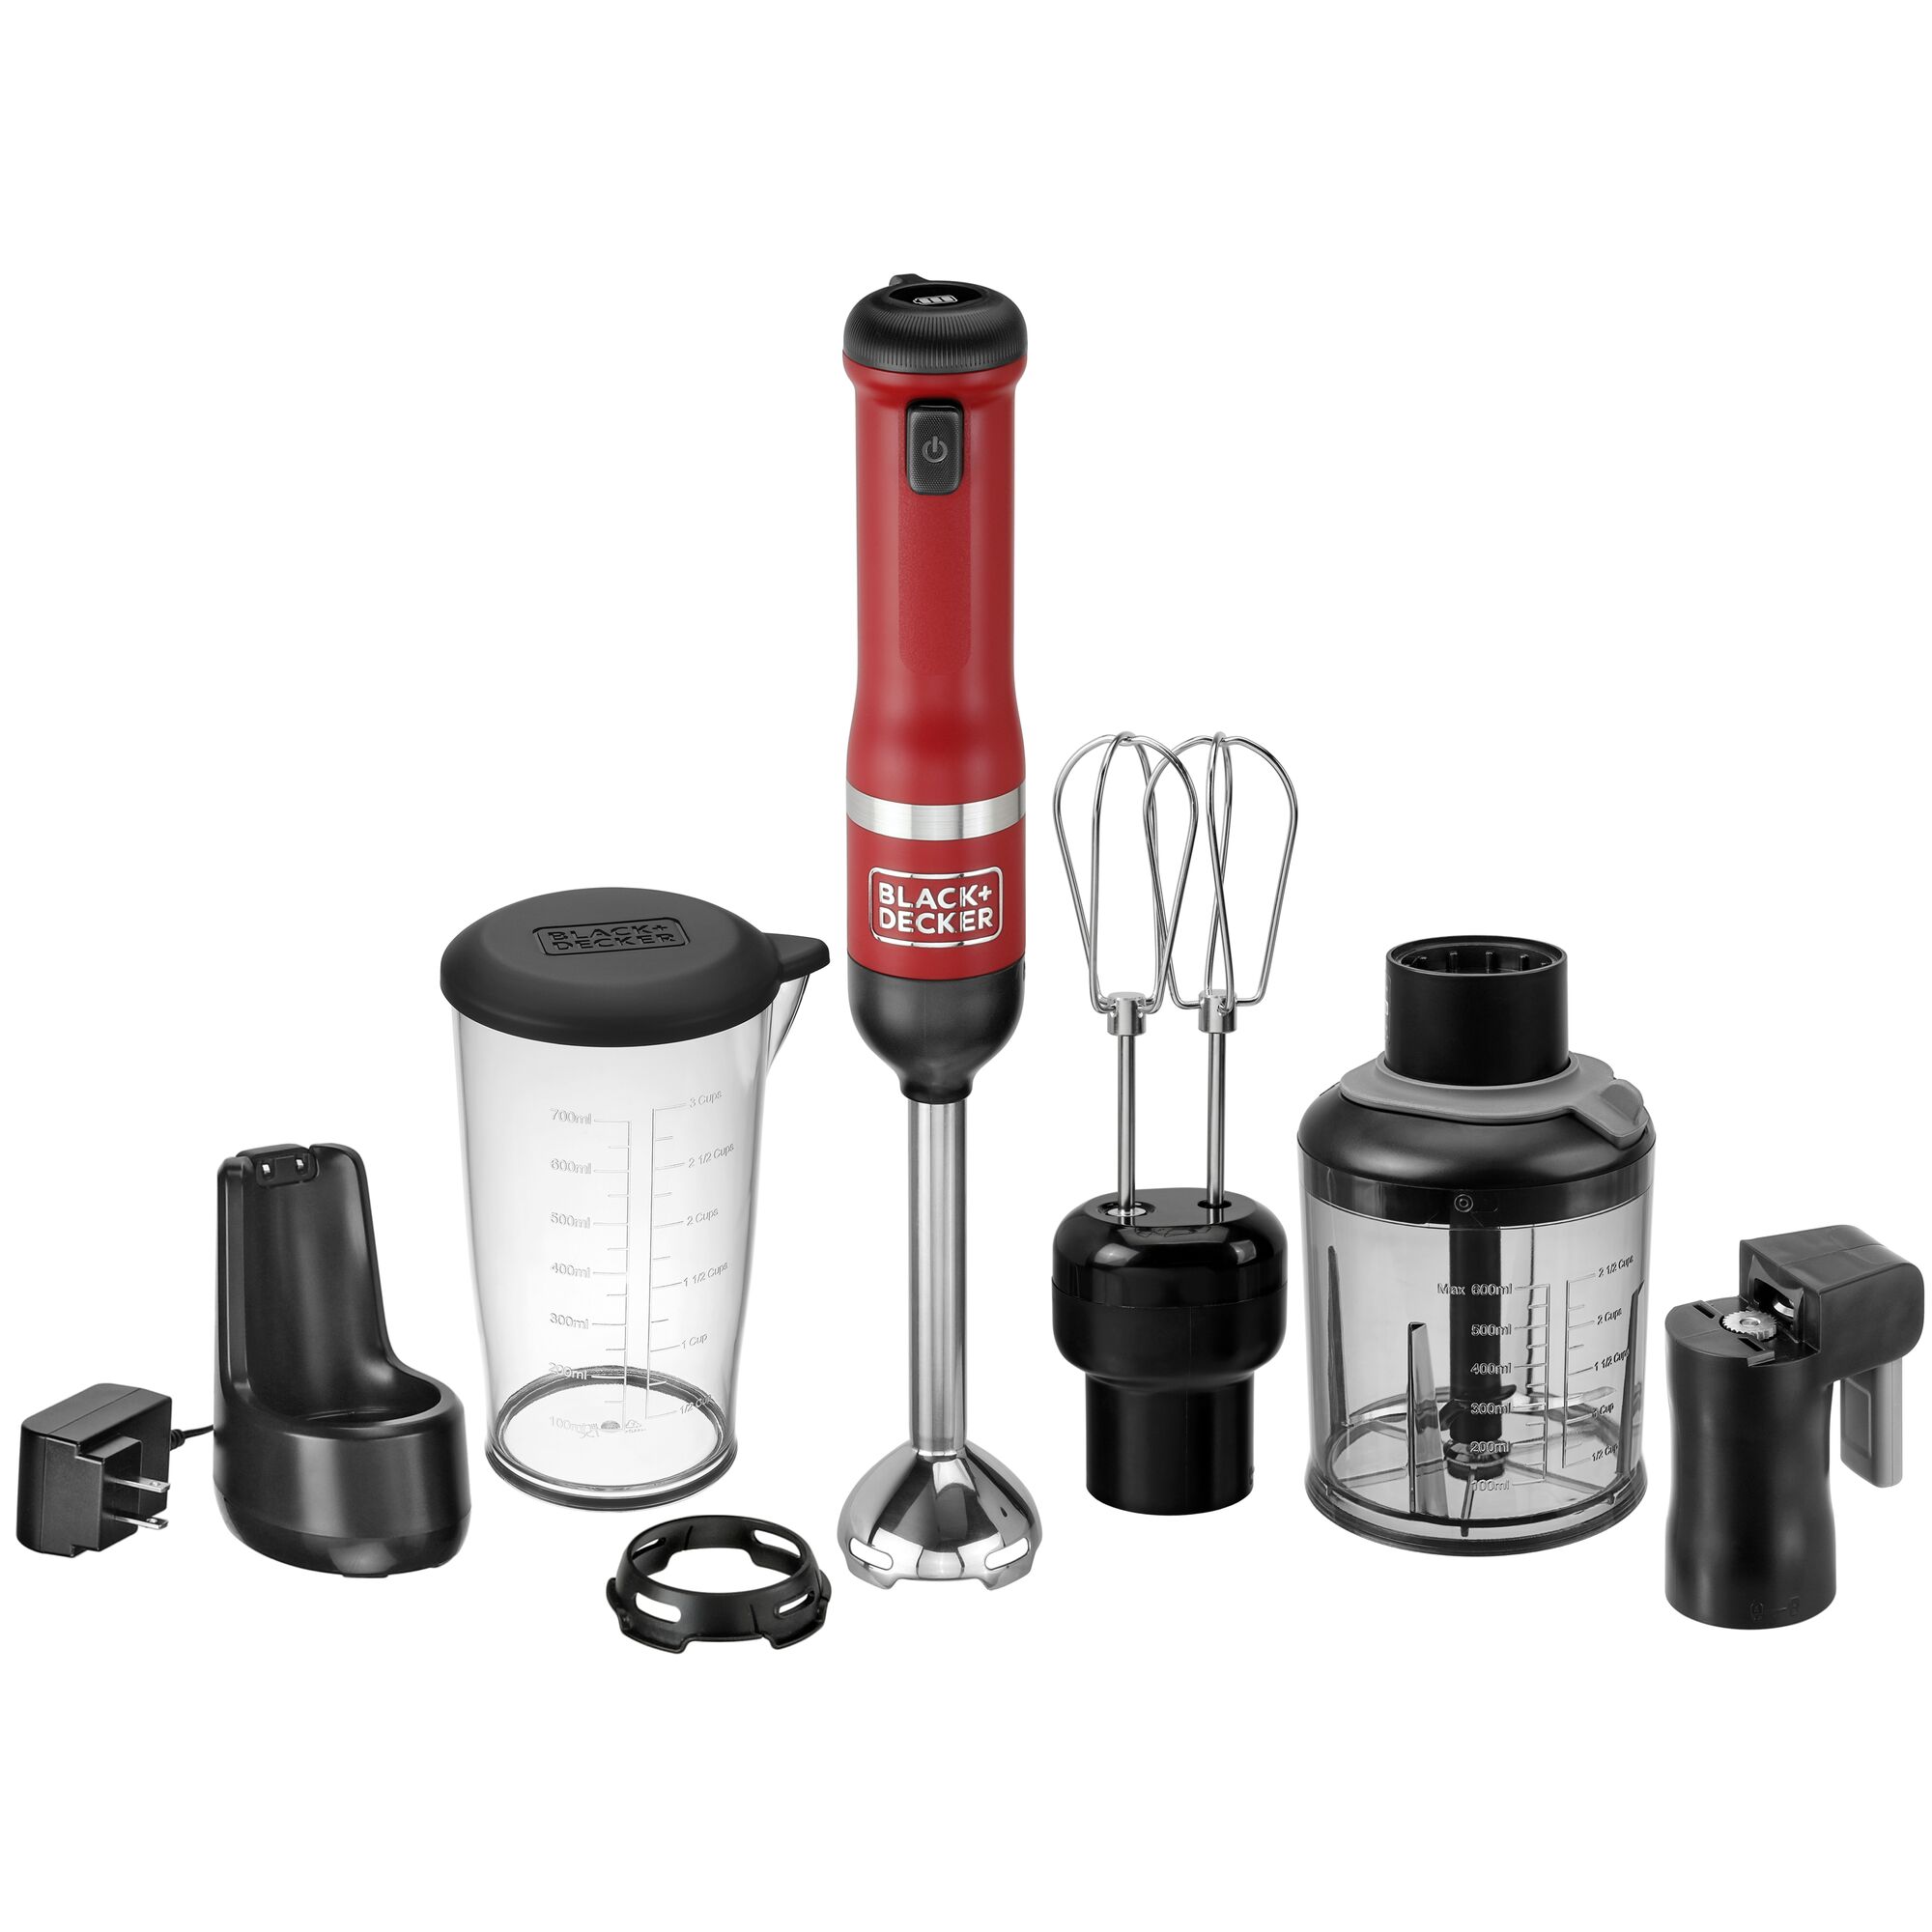 Front view of BLACK+DECKER kitchen wand 3in1 Cordless Kitchen multi-tool kit in red featuring immersion blender, hand mixer, can opener and food chopper atachments